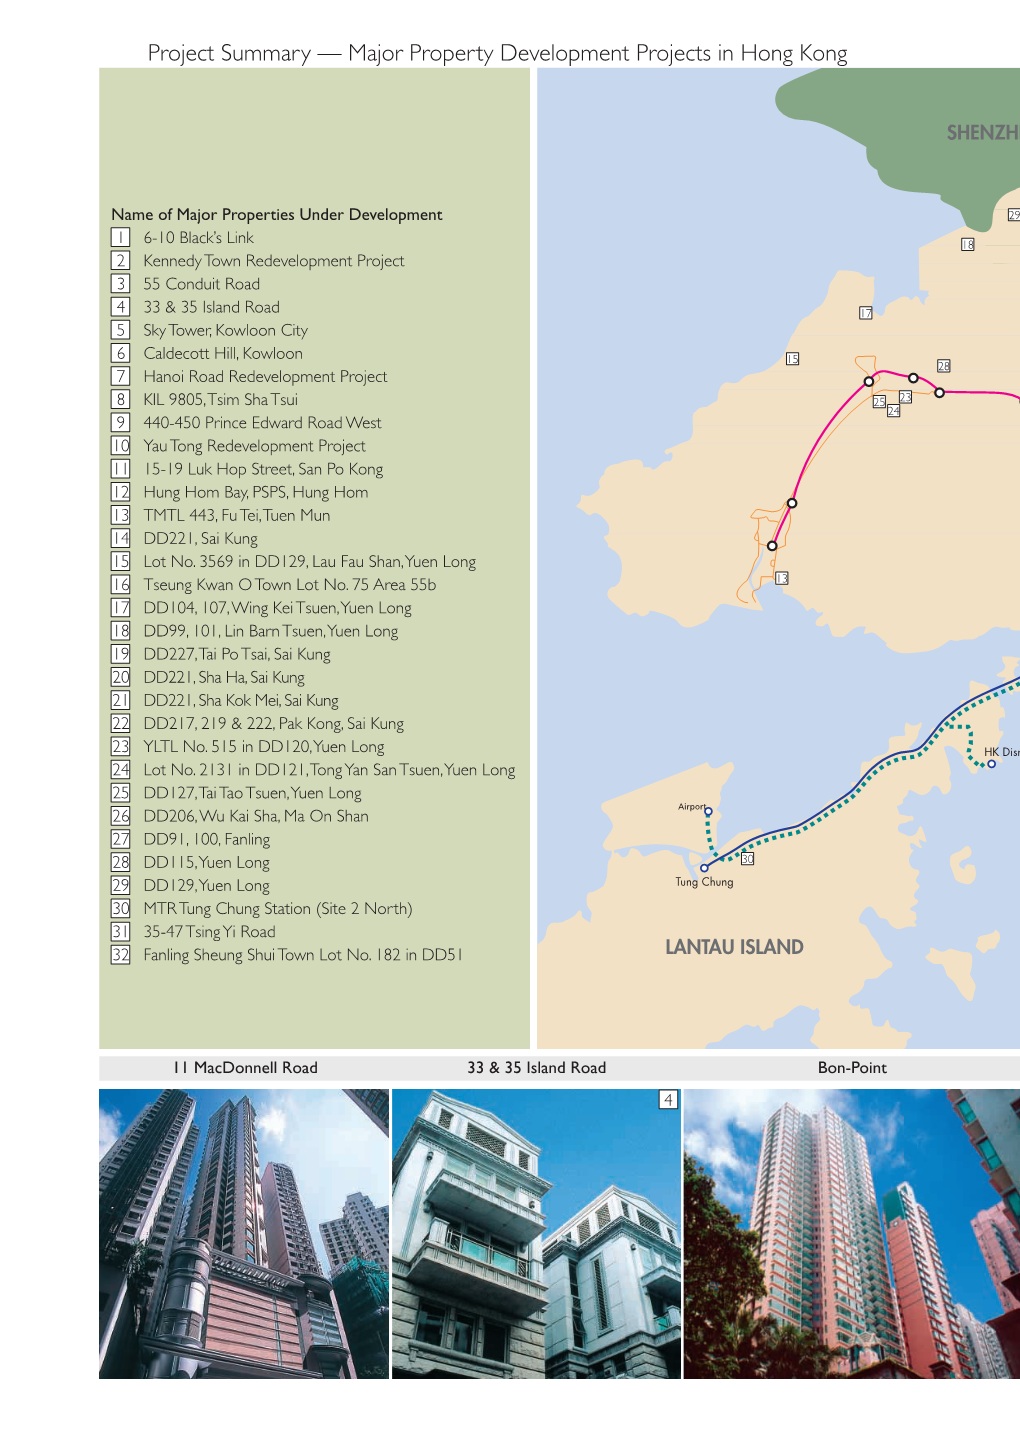 Major Property Development Projects in Hong Kong